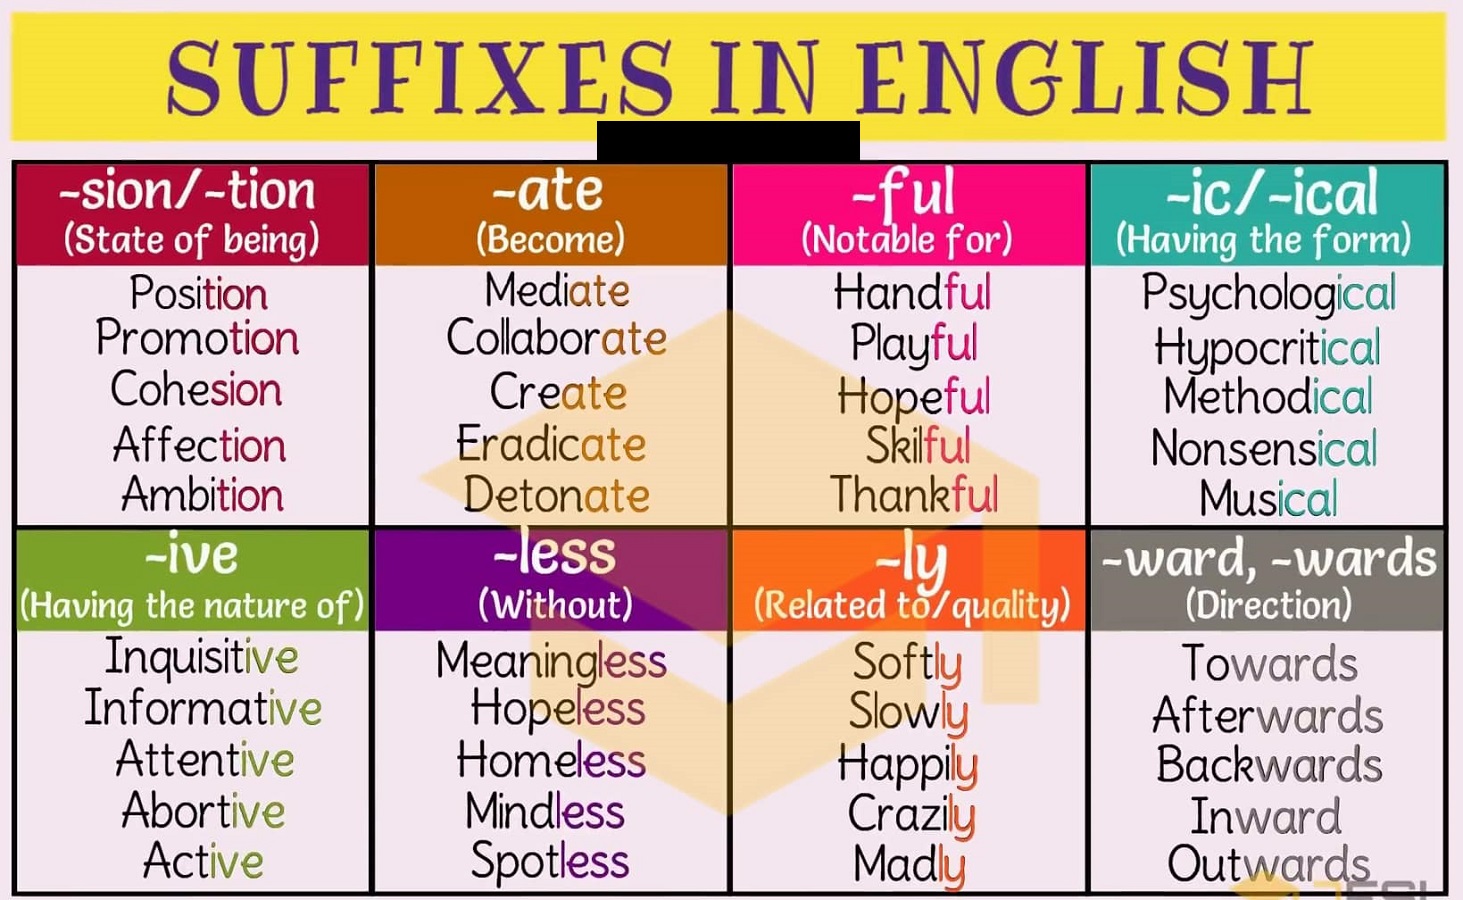 english-adjective-suffixes-list-definition-and-examples-table-of